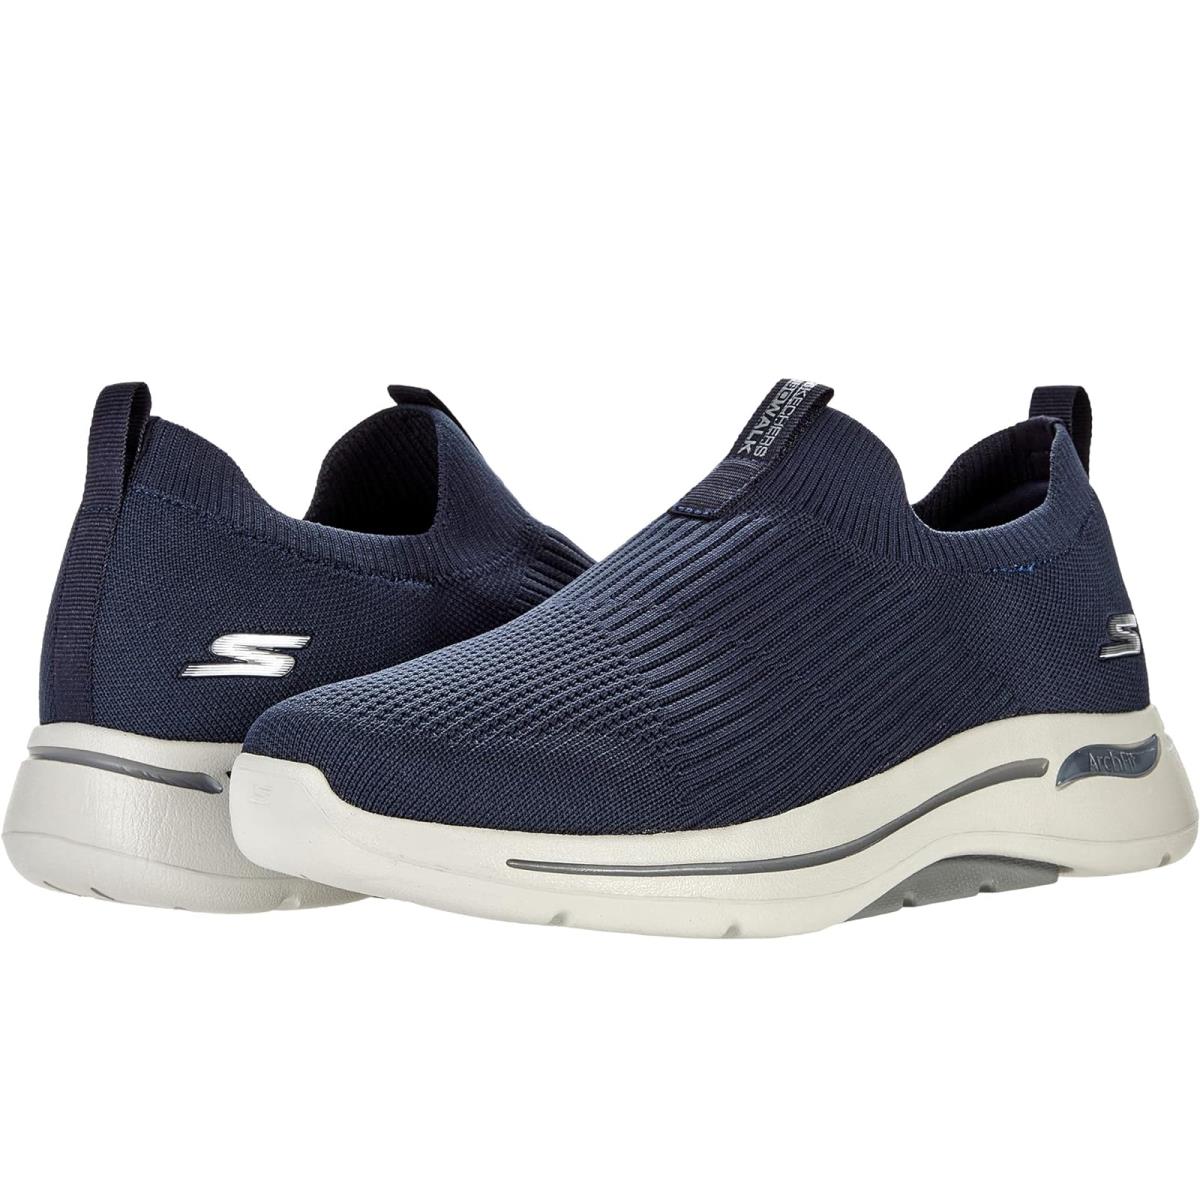 Man`s Shoes Skechers Performance Go Walk Arch Fit - Iconic Navy